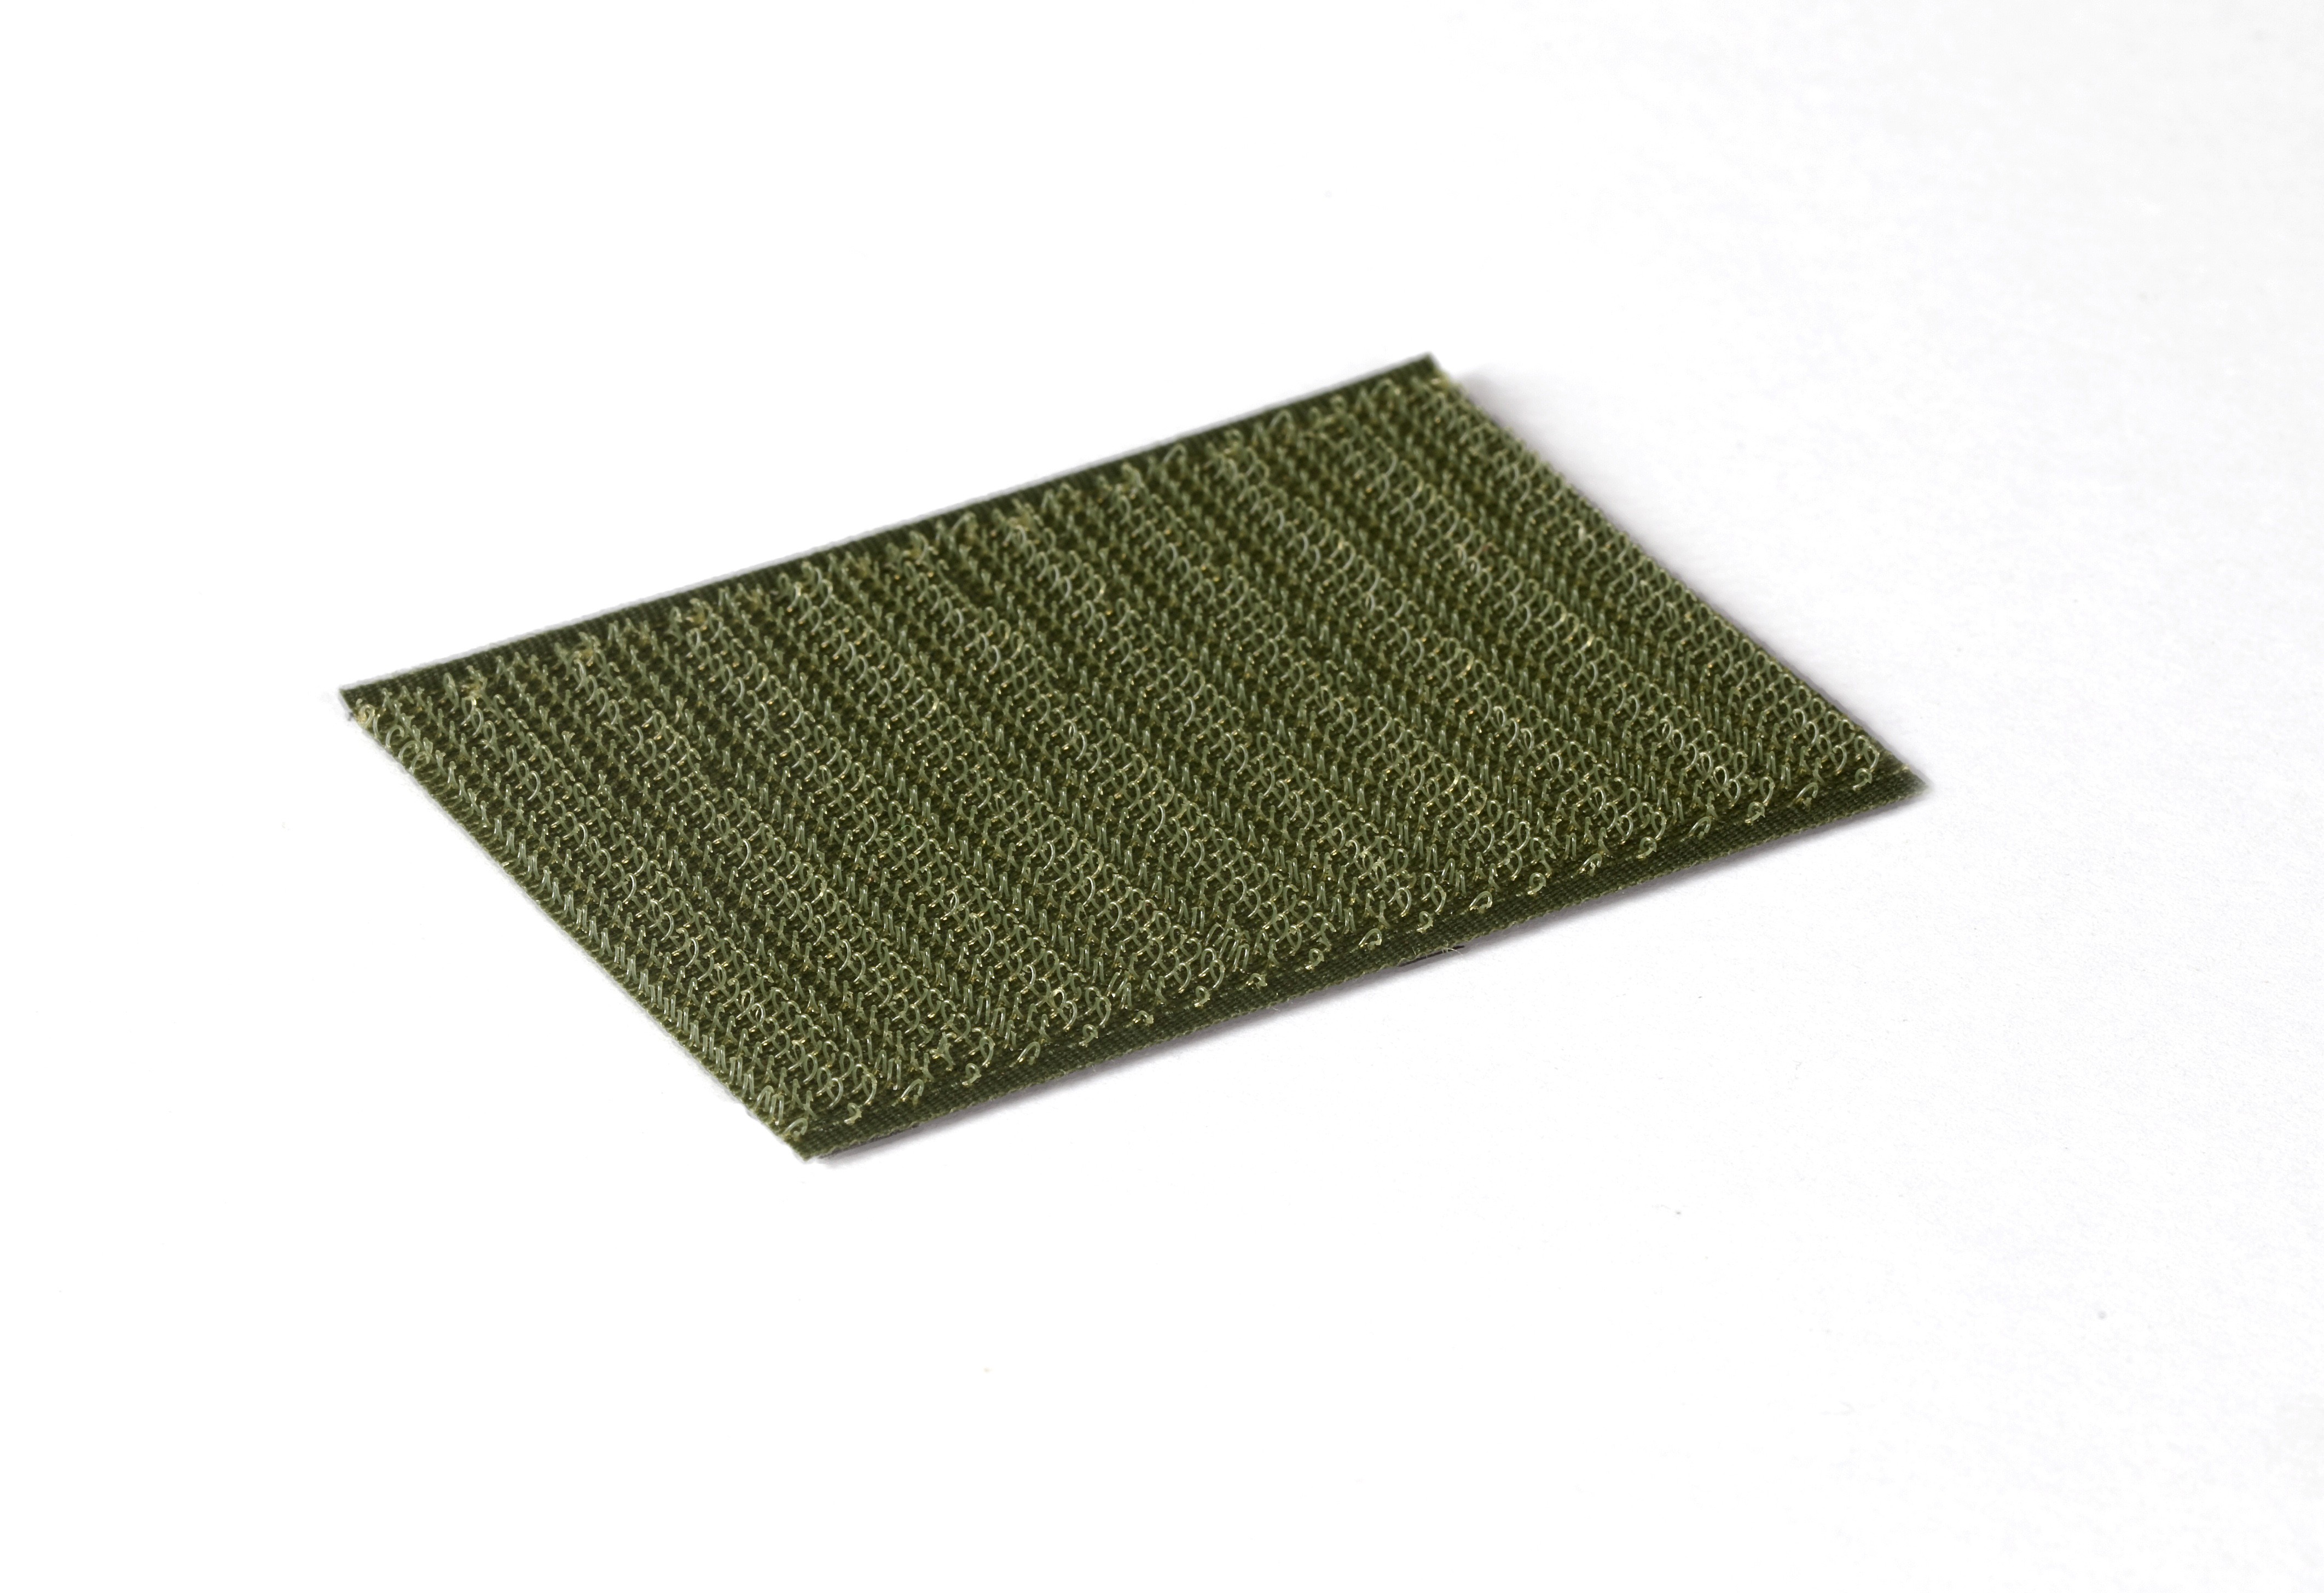 VELCRO® Brand Sew-On Tape in Olive Green Colors